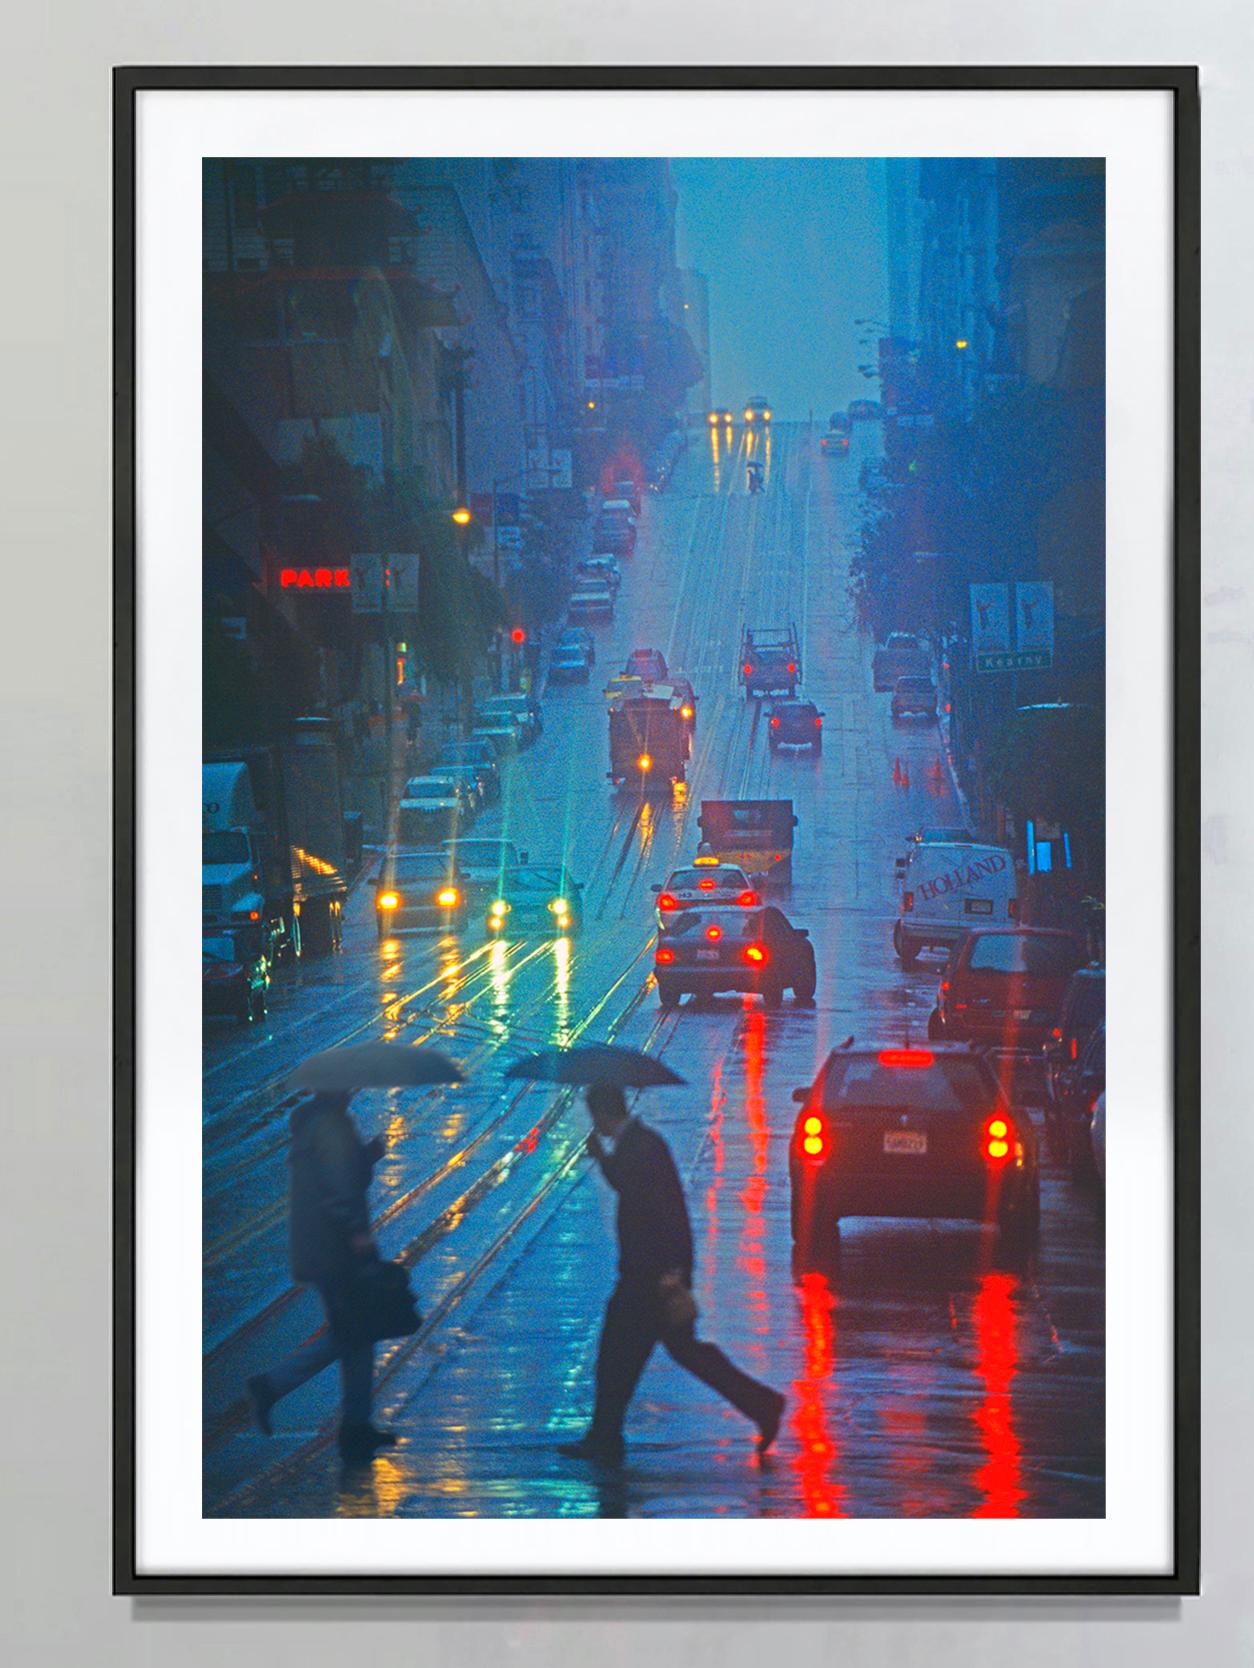 California Street On Rainy Day, San Francisco In Blue Tones - Photograph by Mitchell Funk